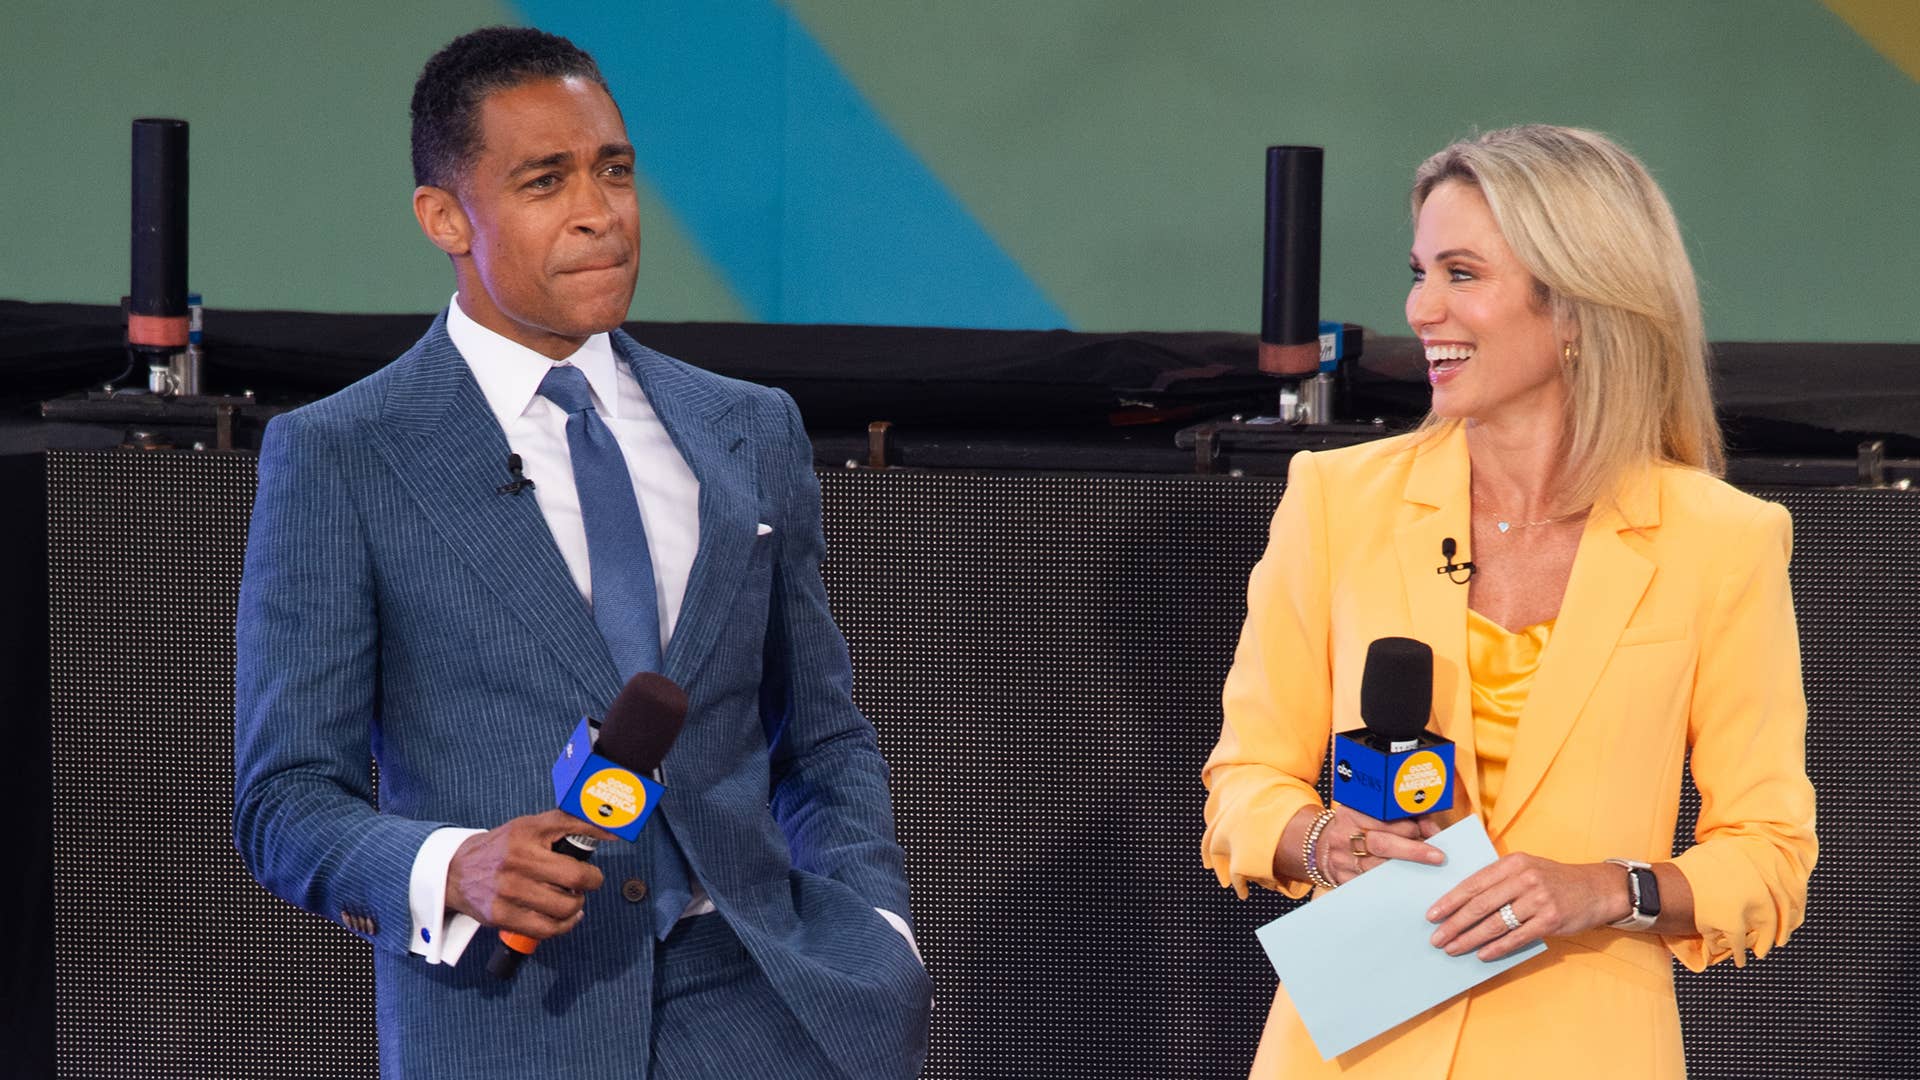 T.J. Holmes and Amy Robach attend ABC's "Good Morning America"